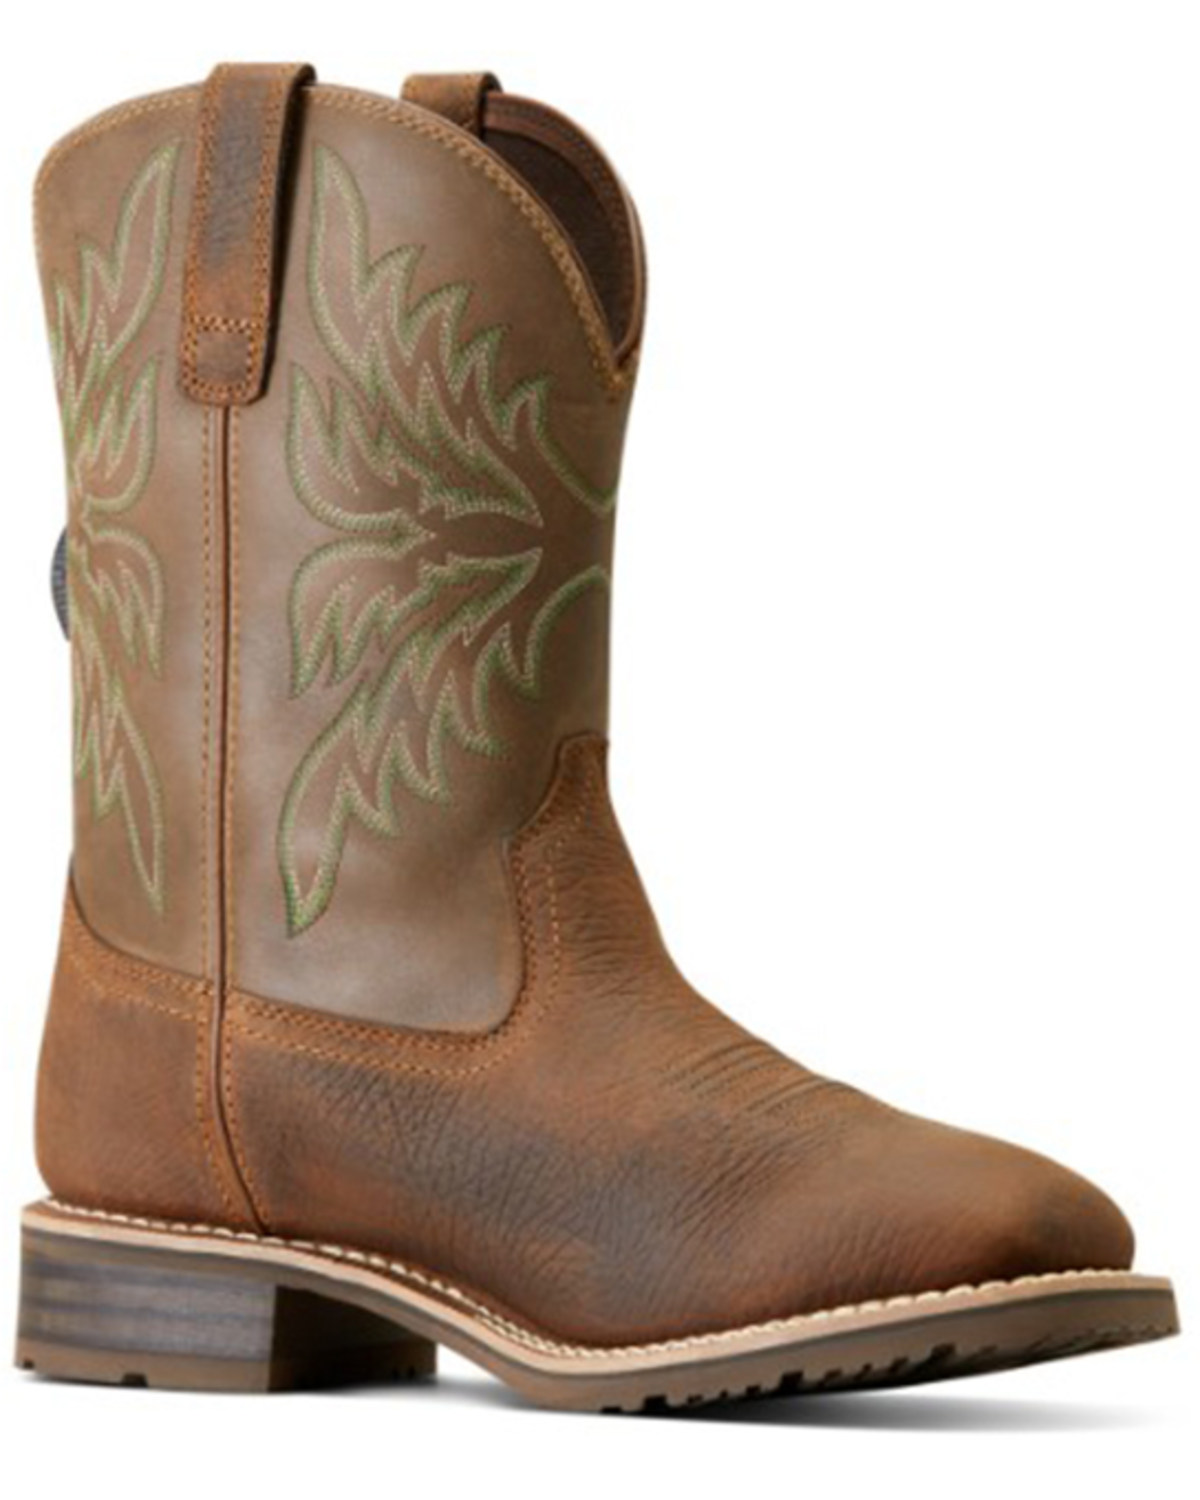 Ariat Men's Hybrid Rancher Waterproof Western Performance Boots - Broad Square Toe